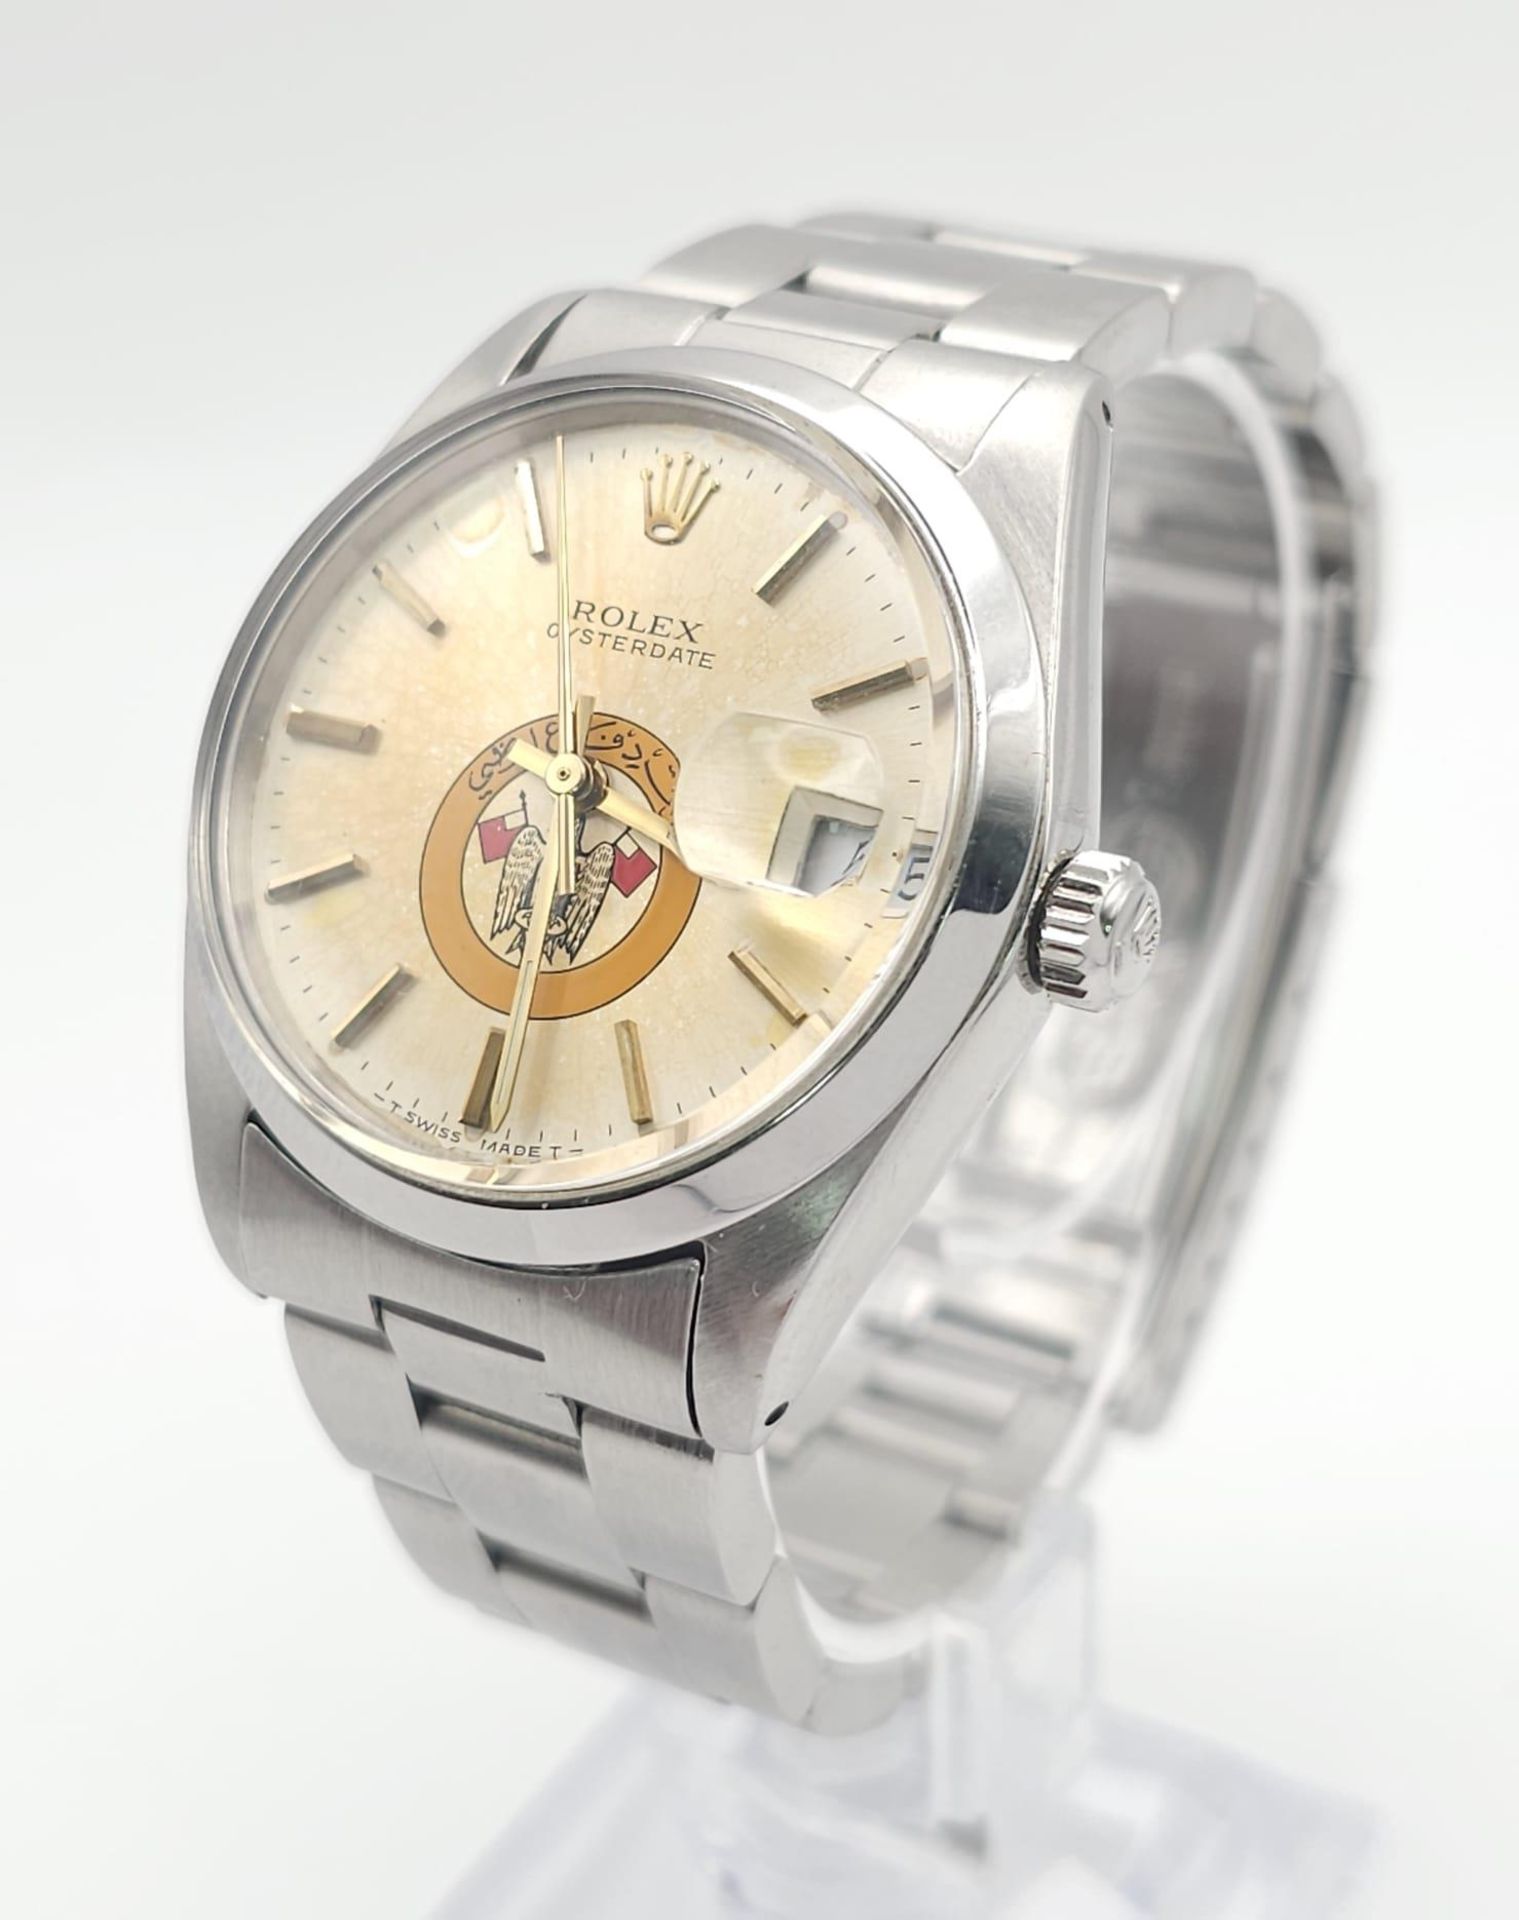 A ROLEX OYSTERDATE IN STAINLESS STEEL SPORTING THE EAGLE LOGO OF ABU DHABI .(DIAL NEEDS CLEANING) - Image 2 of 13